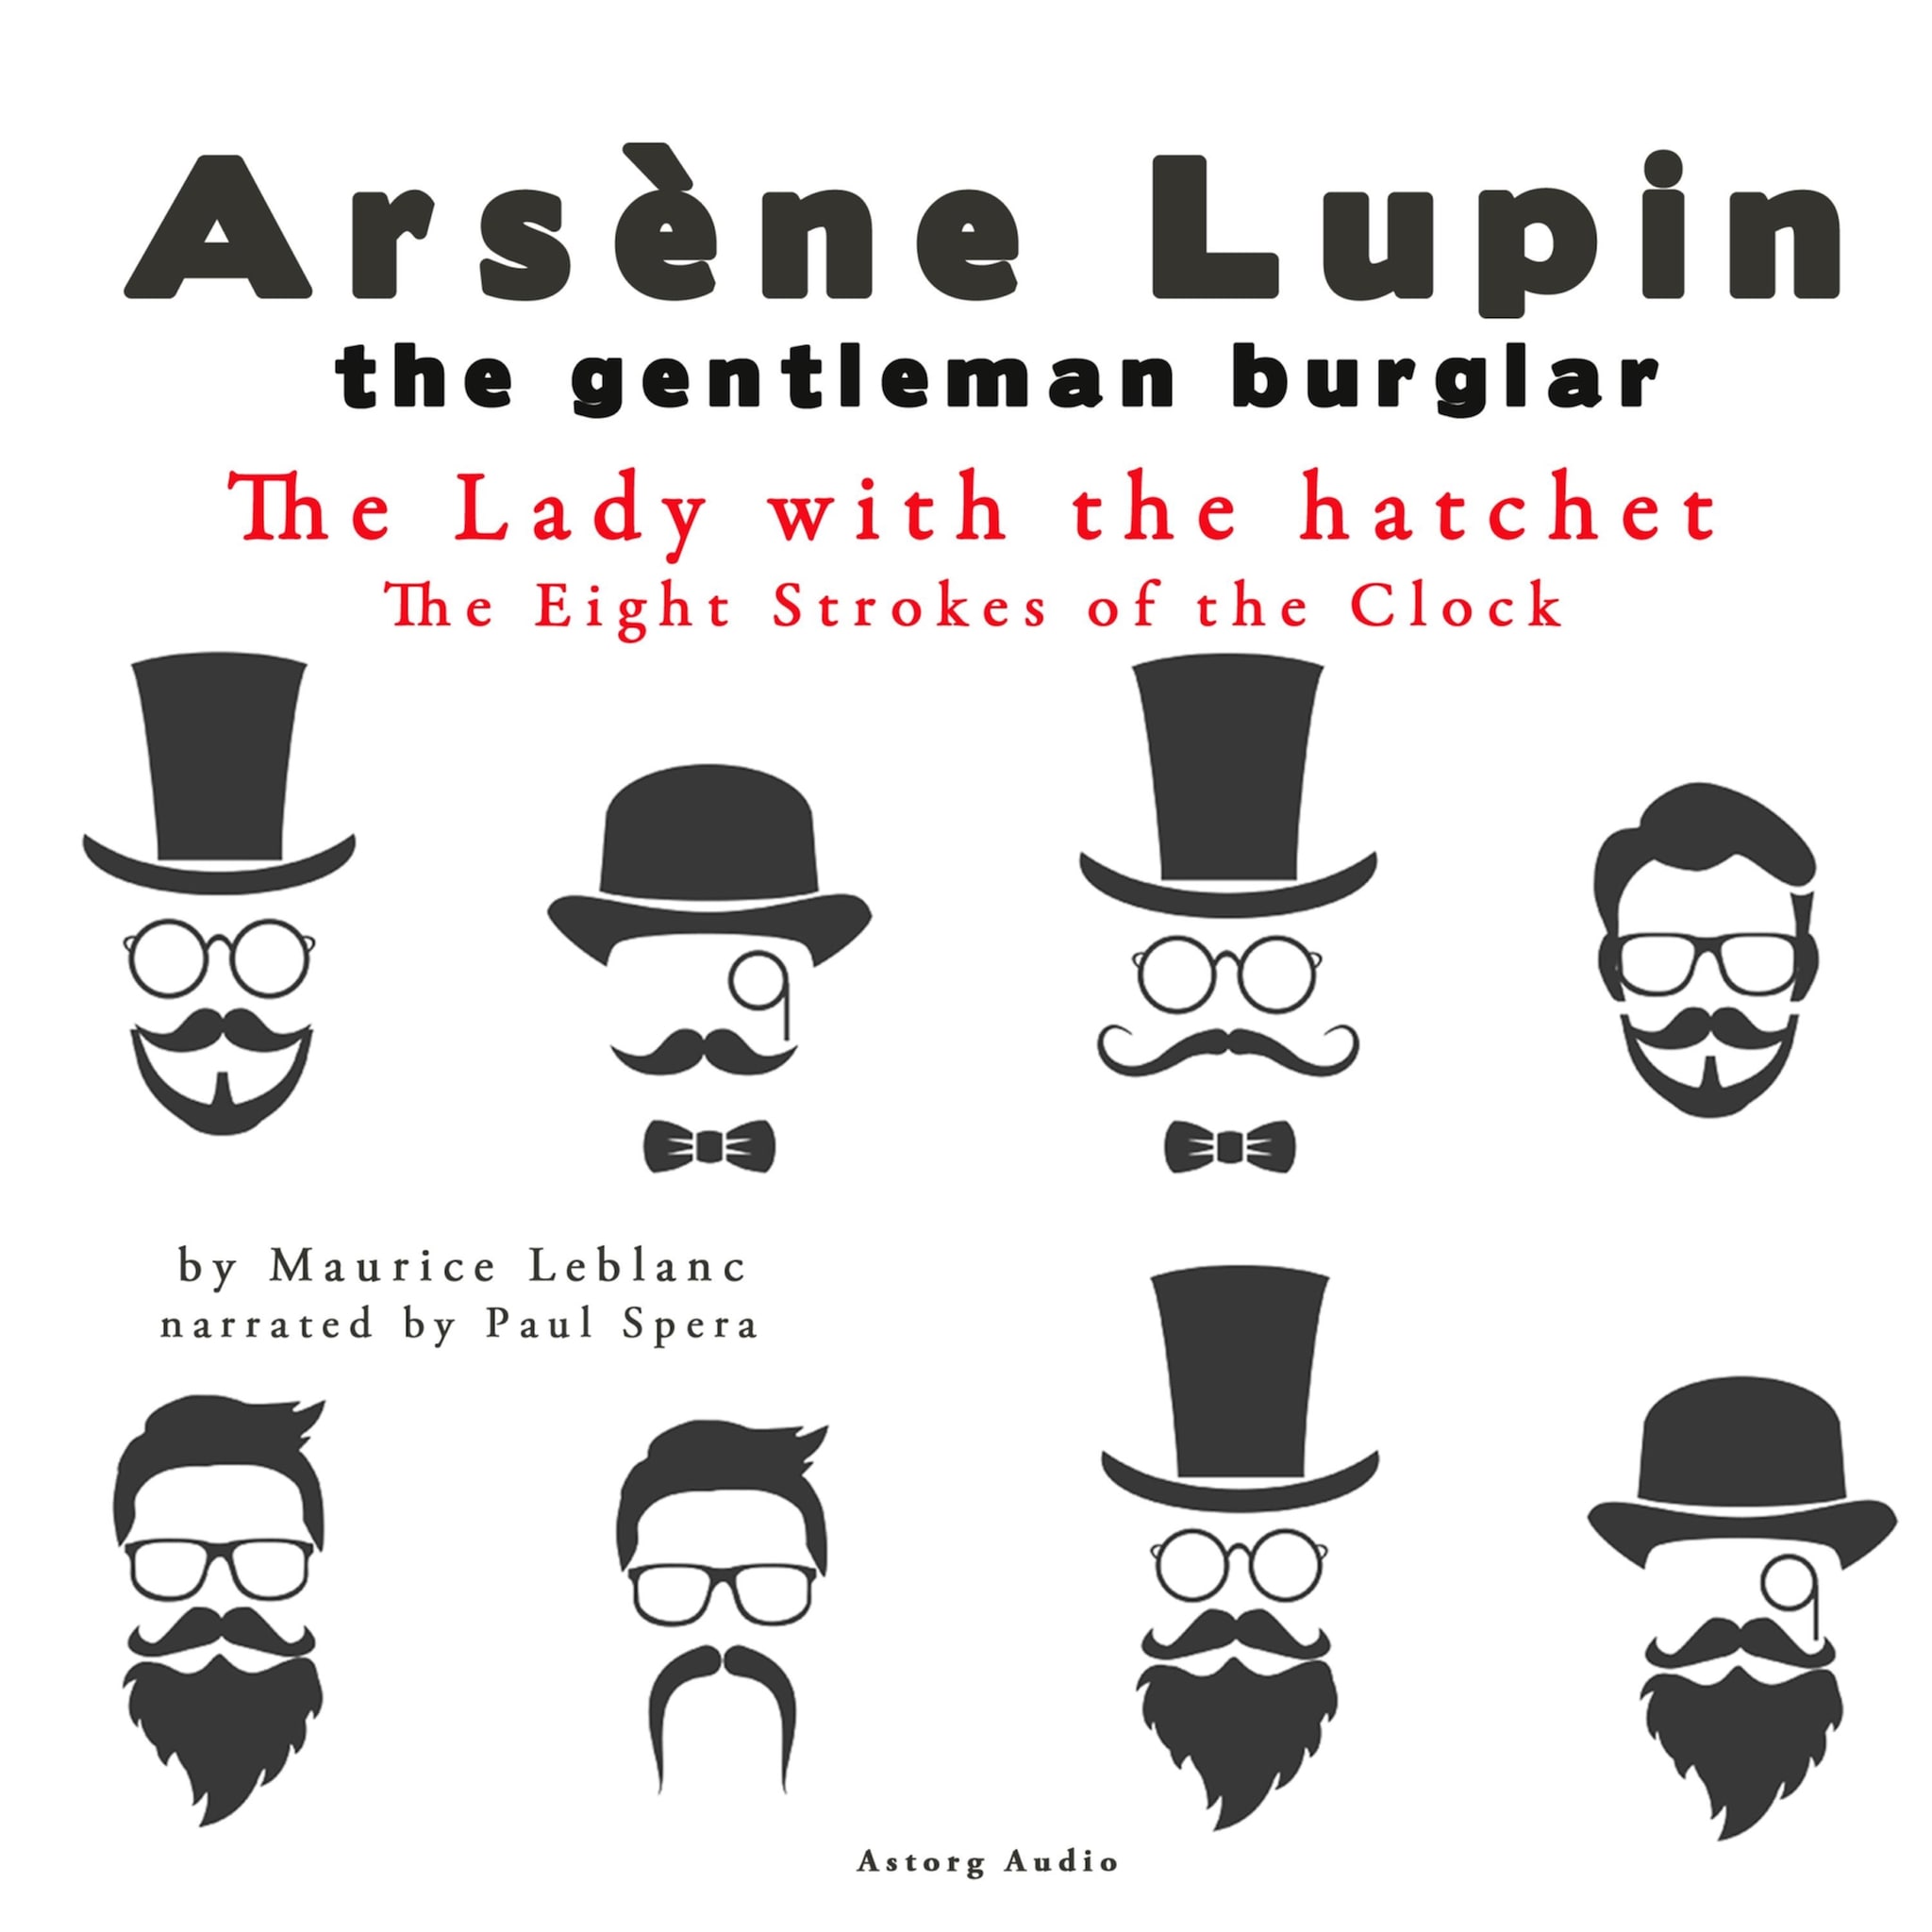 The Lady with the hatchet, The Eight Strokes of the Clock, The adventures of Arsène Lupin ilmaiseksi